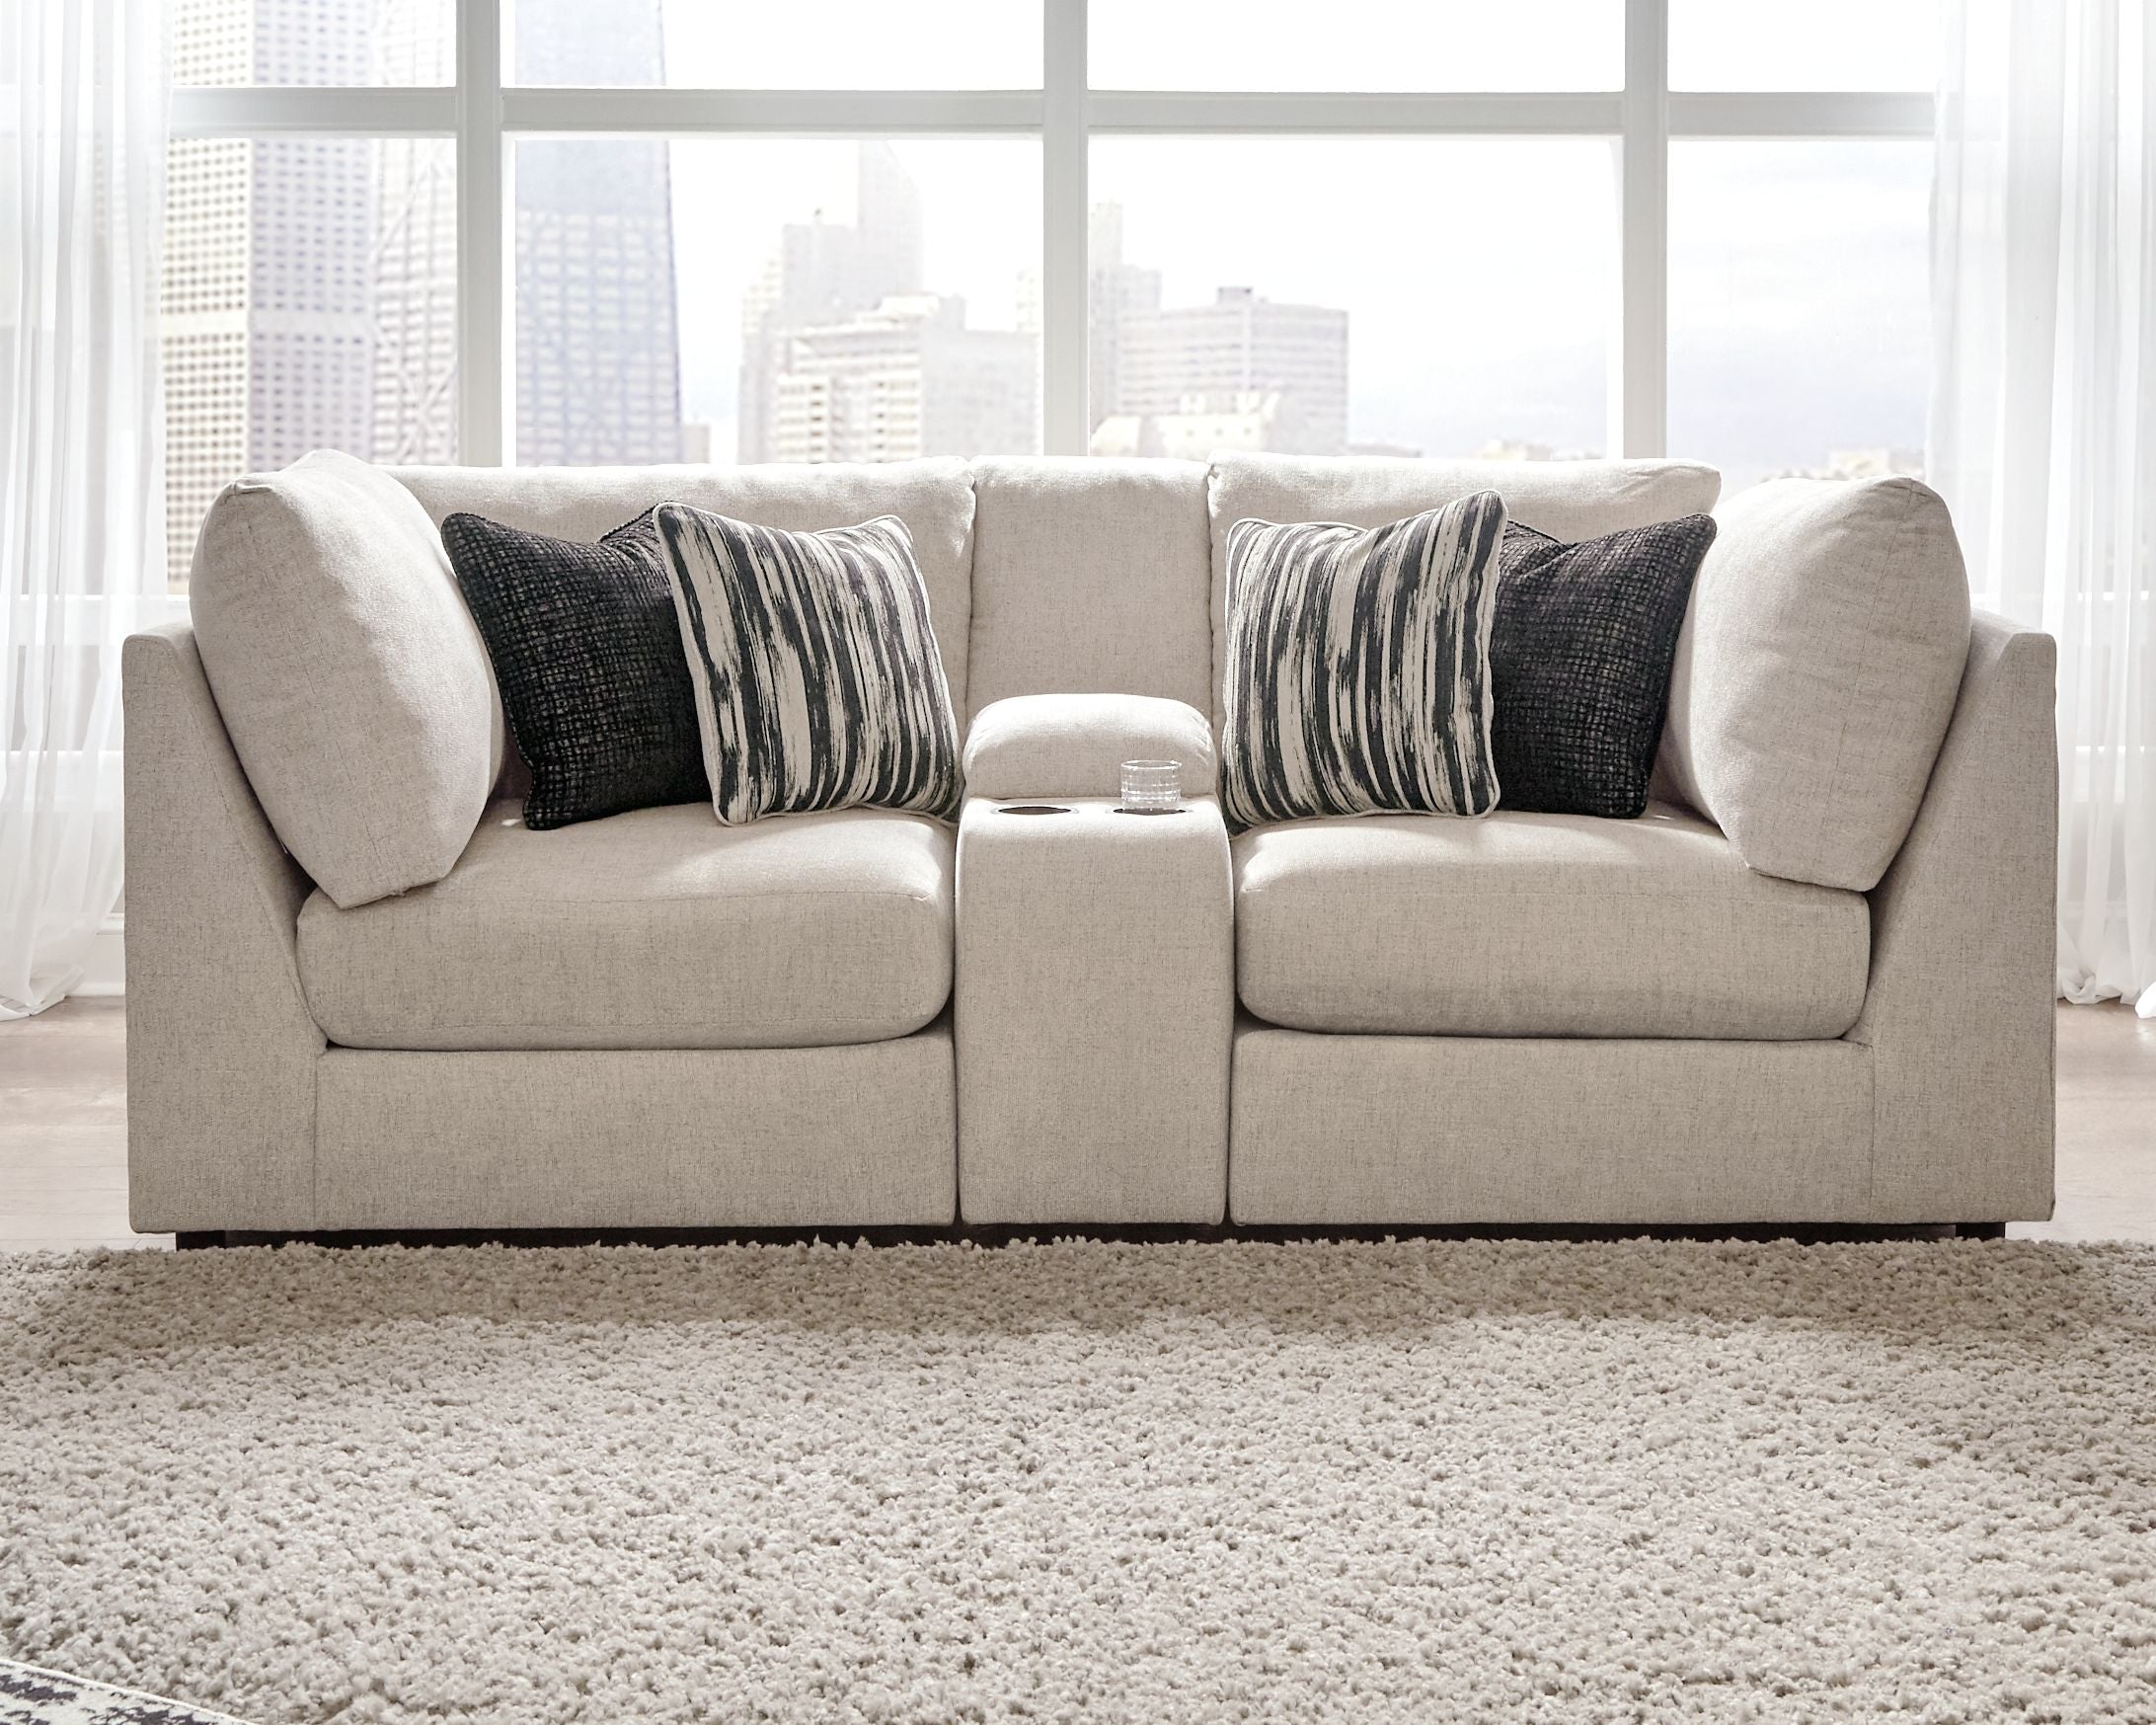 Kellway - Sectional-Stationary Sectionals-American Furniture Outlet